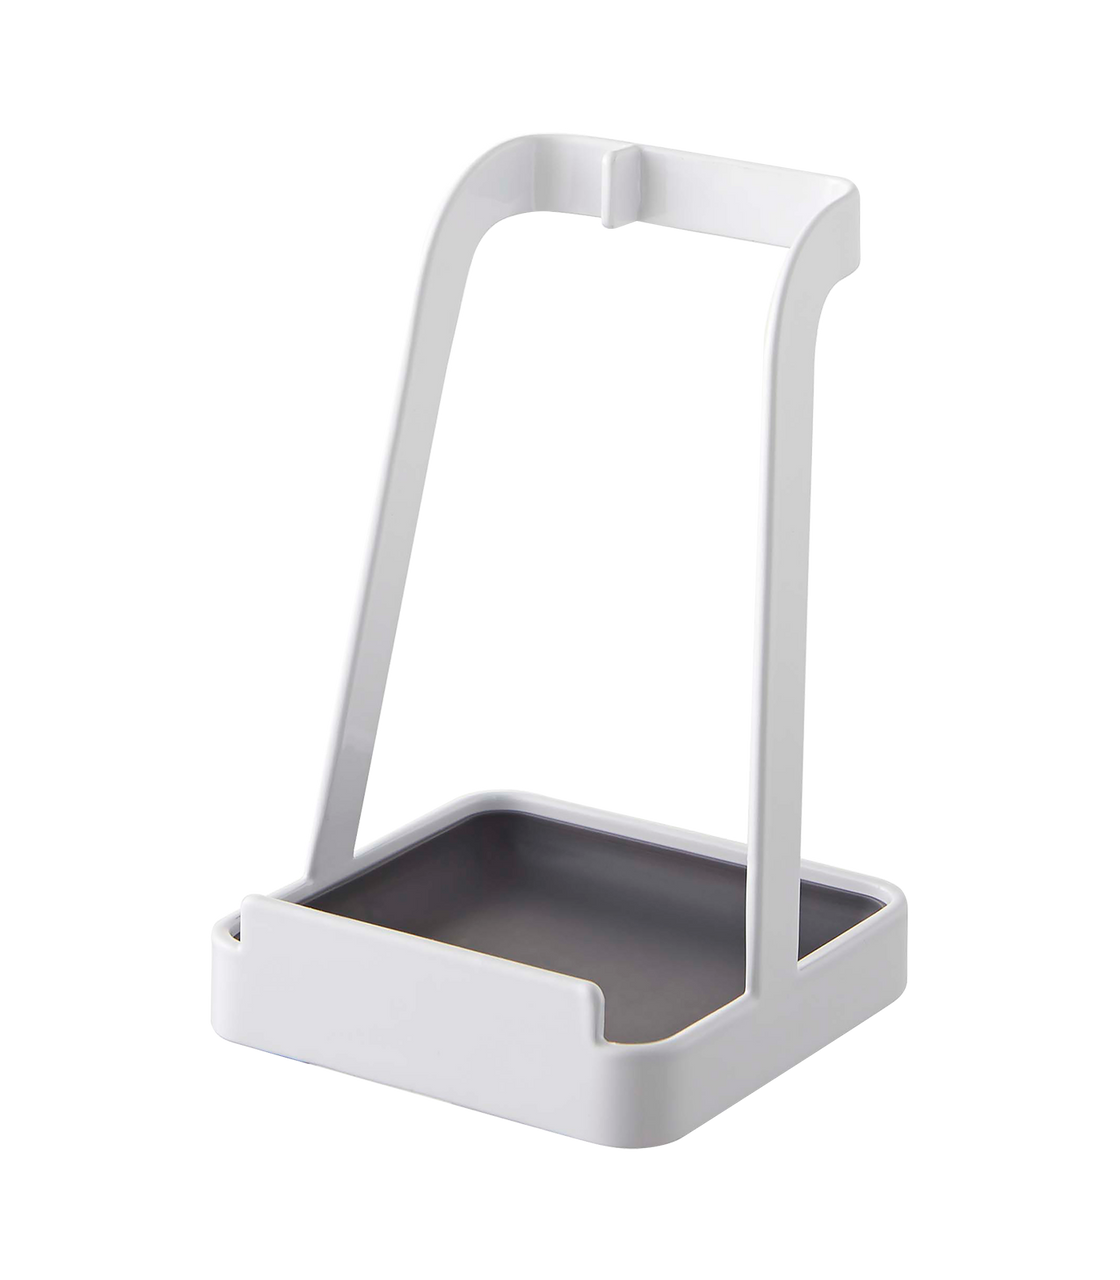 Top Rated Tower Steel Ladle Stand Works Double Time as At Attention Spoon  Rest and Tablet Holder (White)